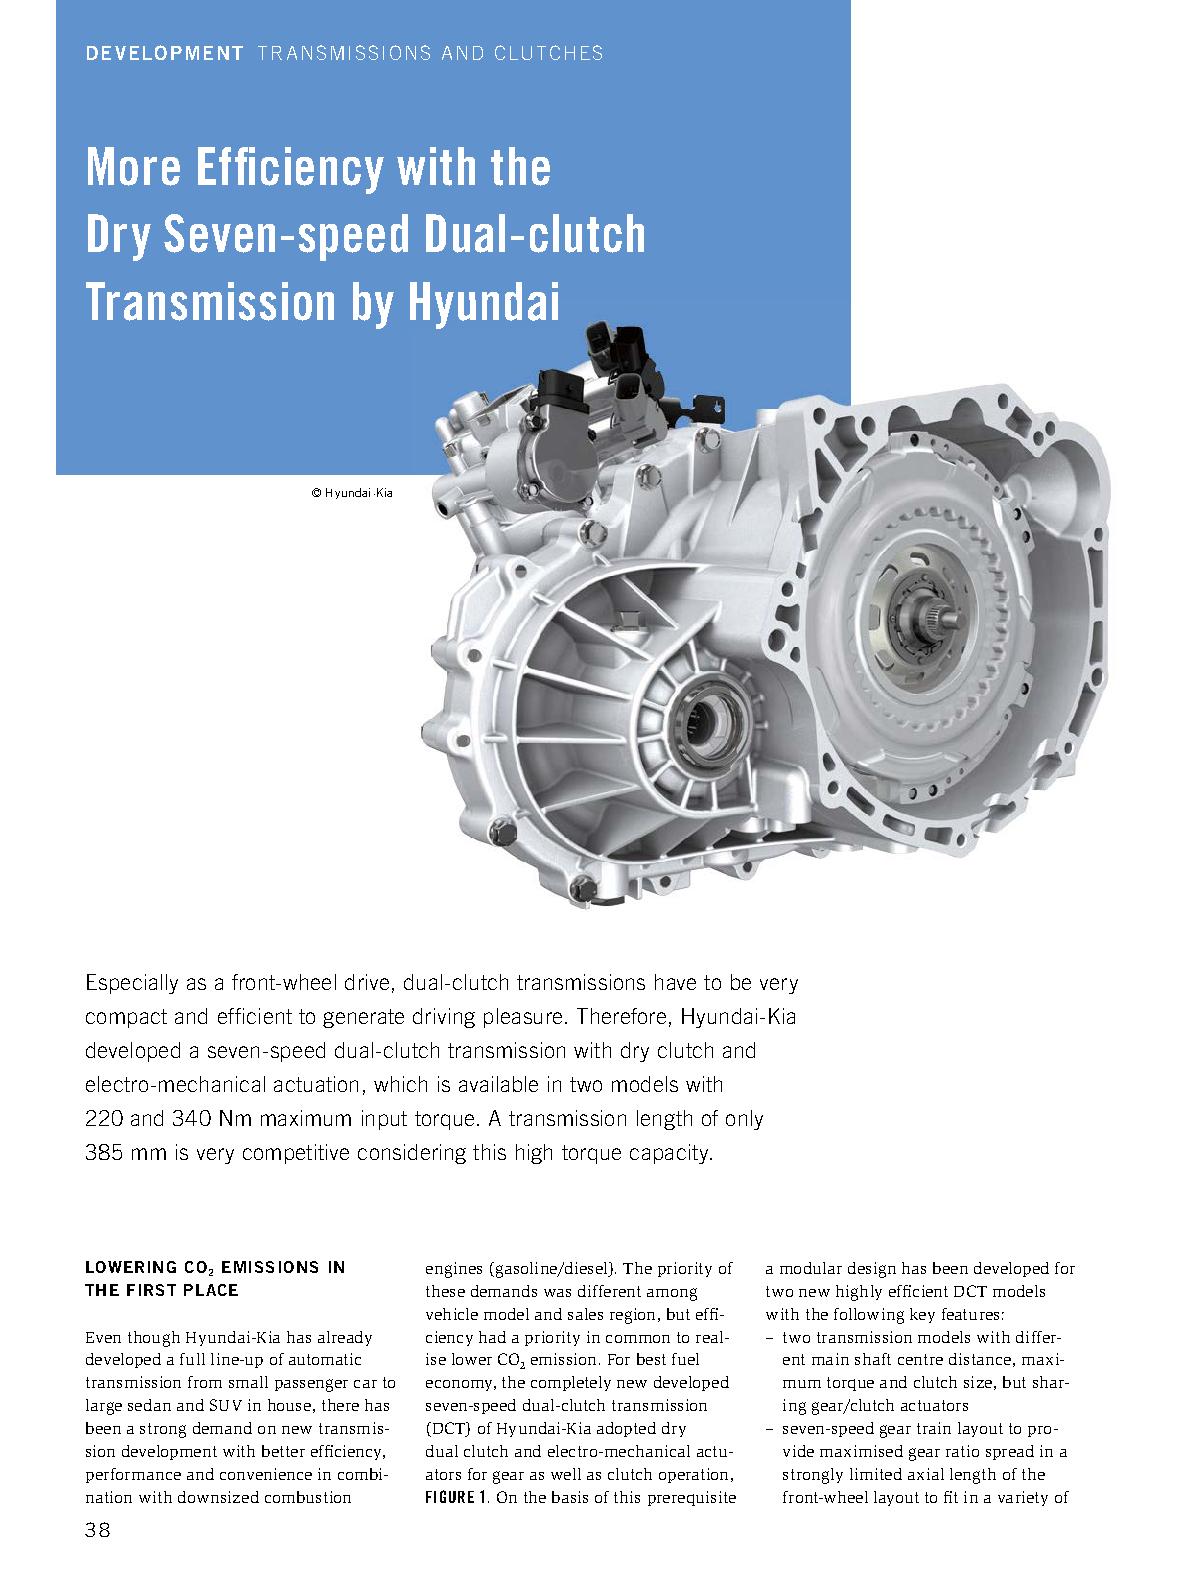 More Efficiency with the Dry Seven-speed Dual-clutch Transmission ...